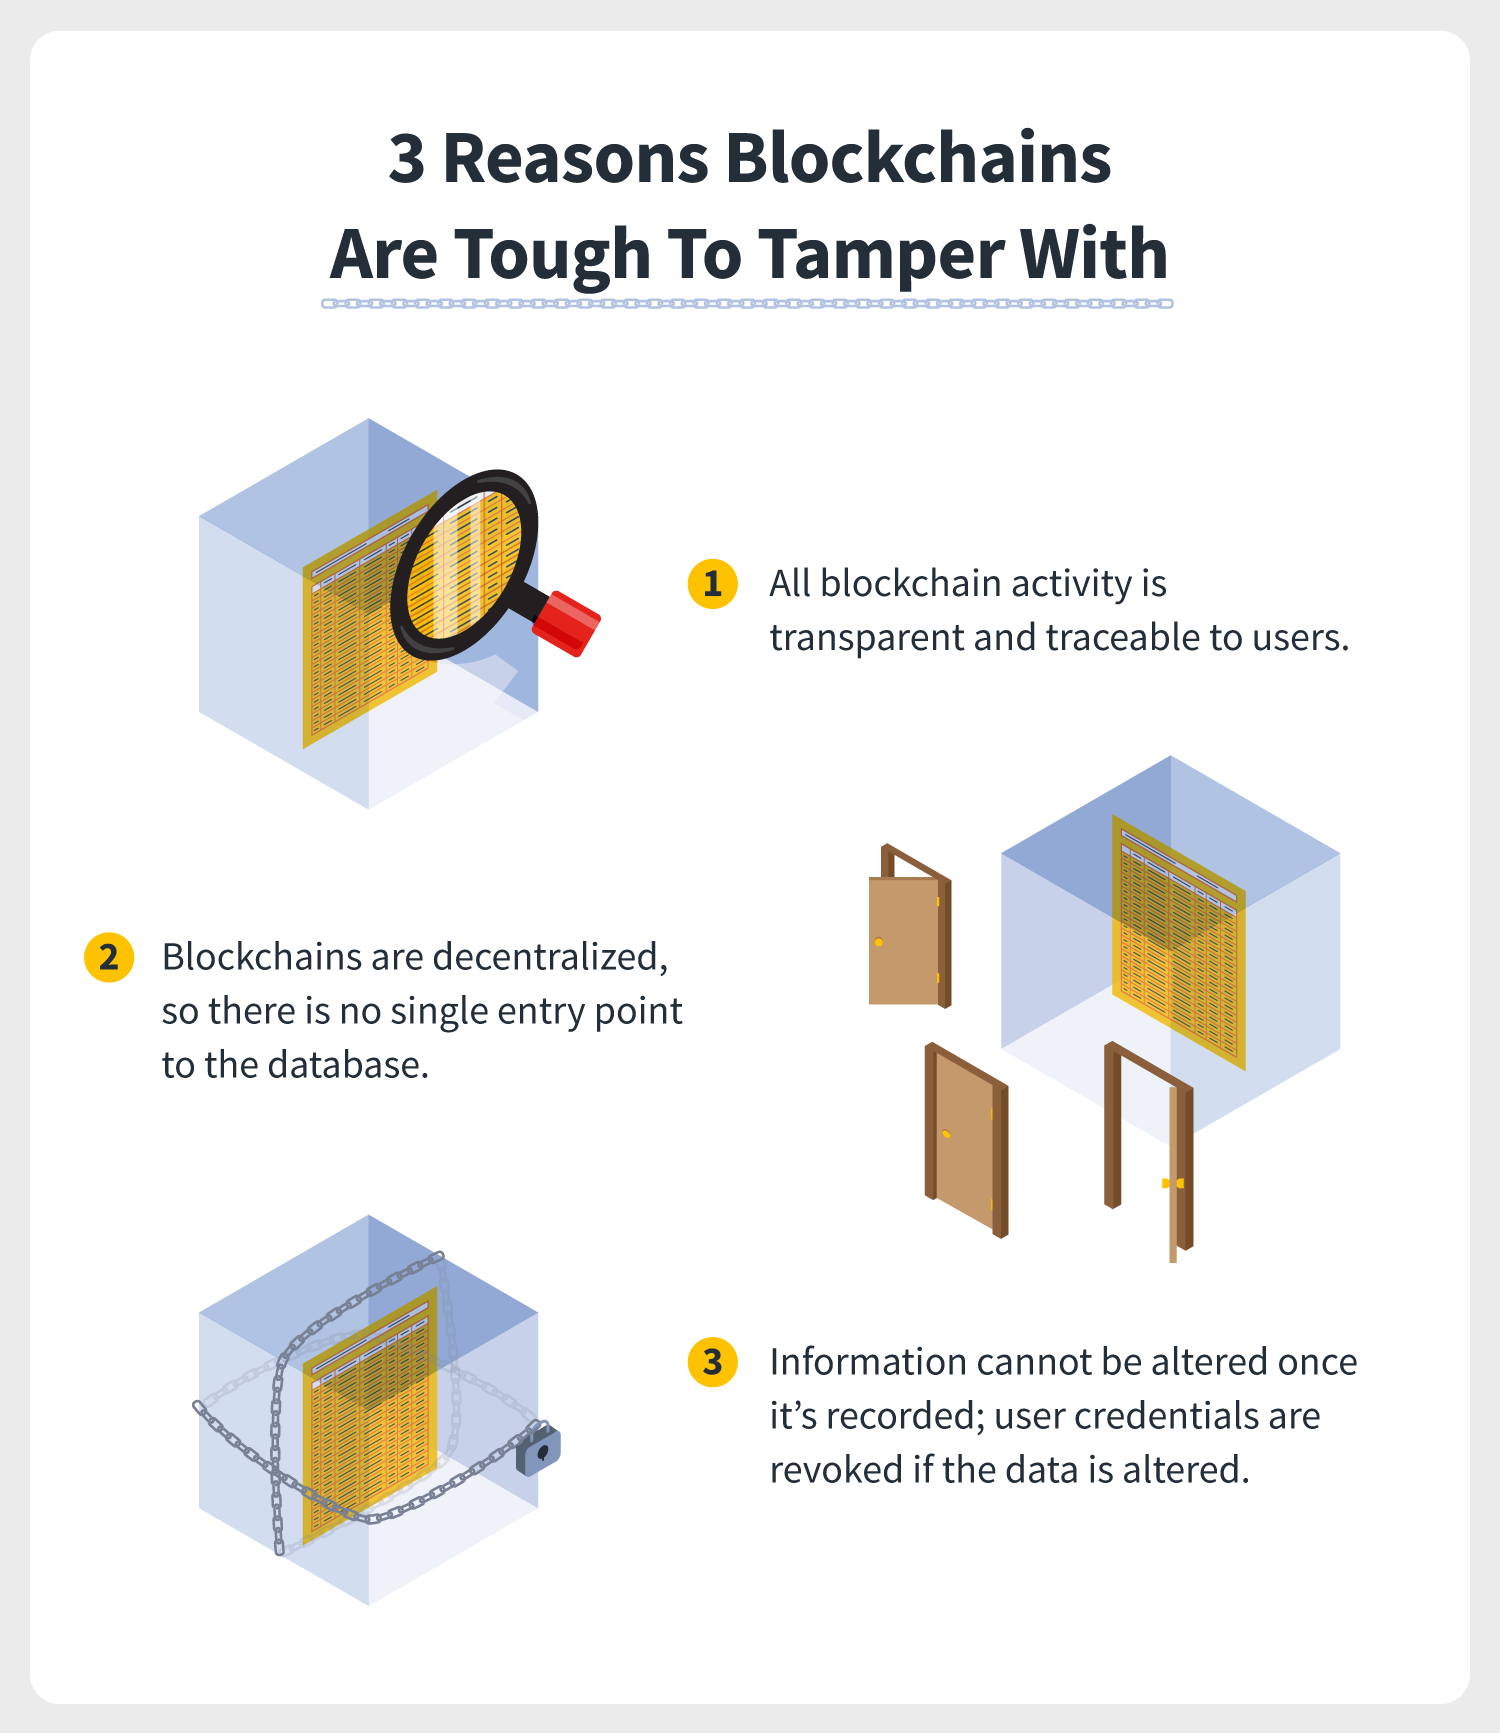 three illustrations underscore why blockchain technology is tough to tamper with, including that all activity is traceable, blockchains are decentralized, and information can’t be altered once recorded